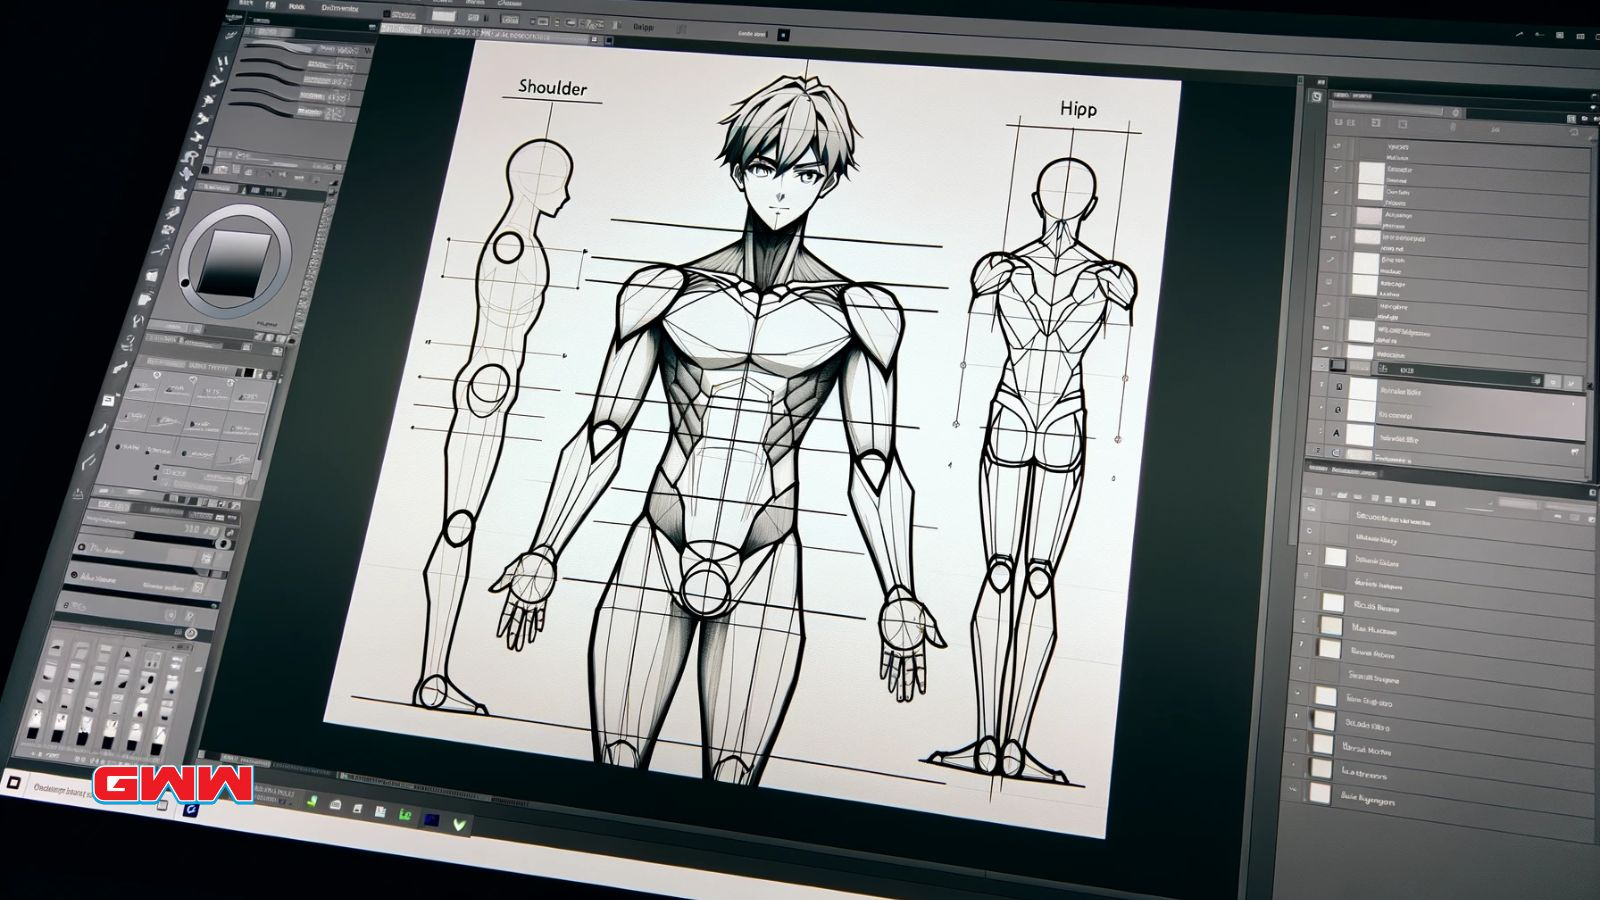 A digital sketch of anime body poses that focus on proportioned parts